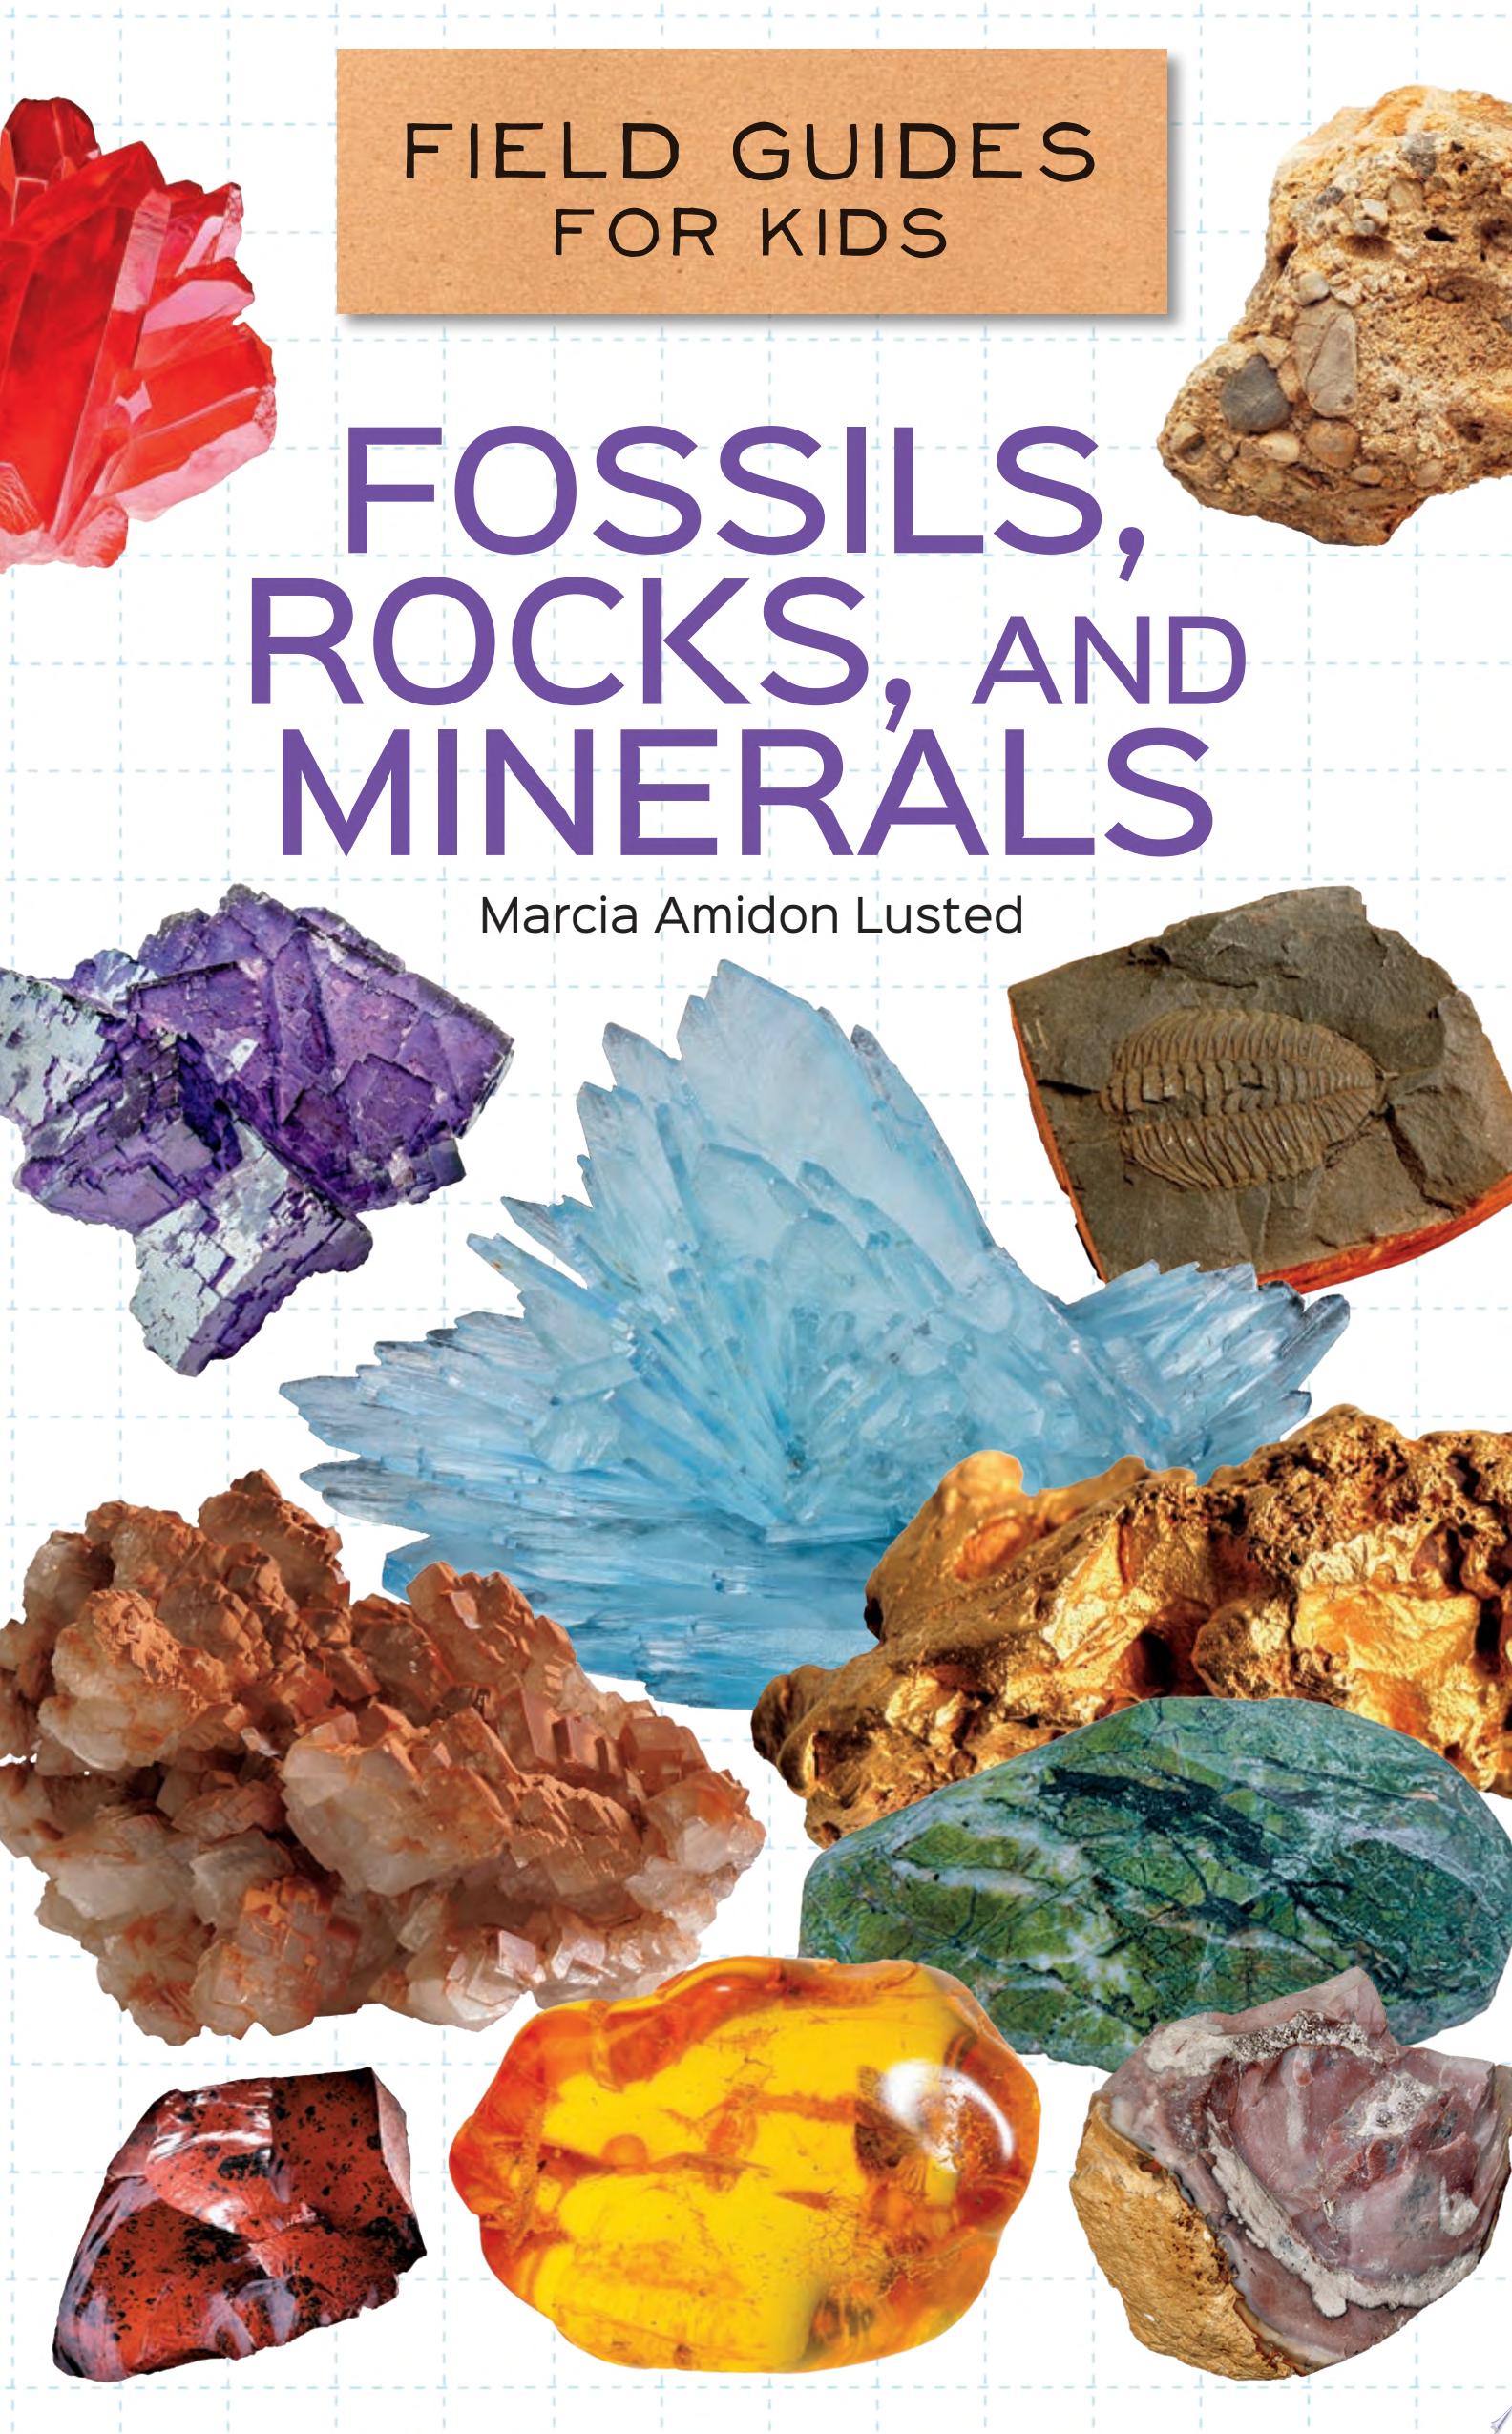 Image for "Fossils, Rocks, and Minerals"